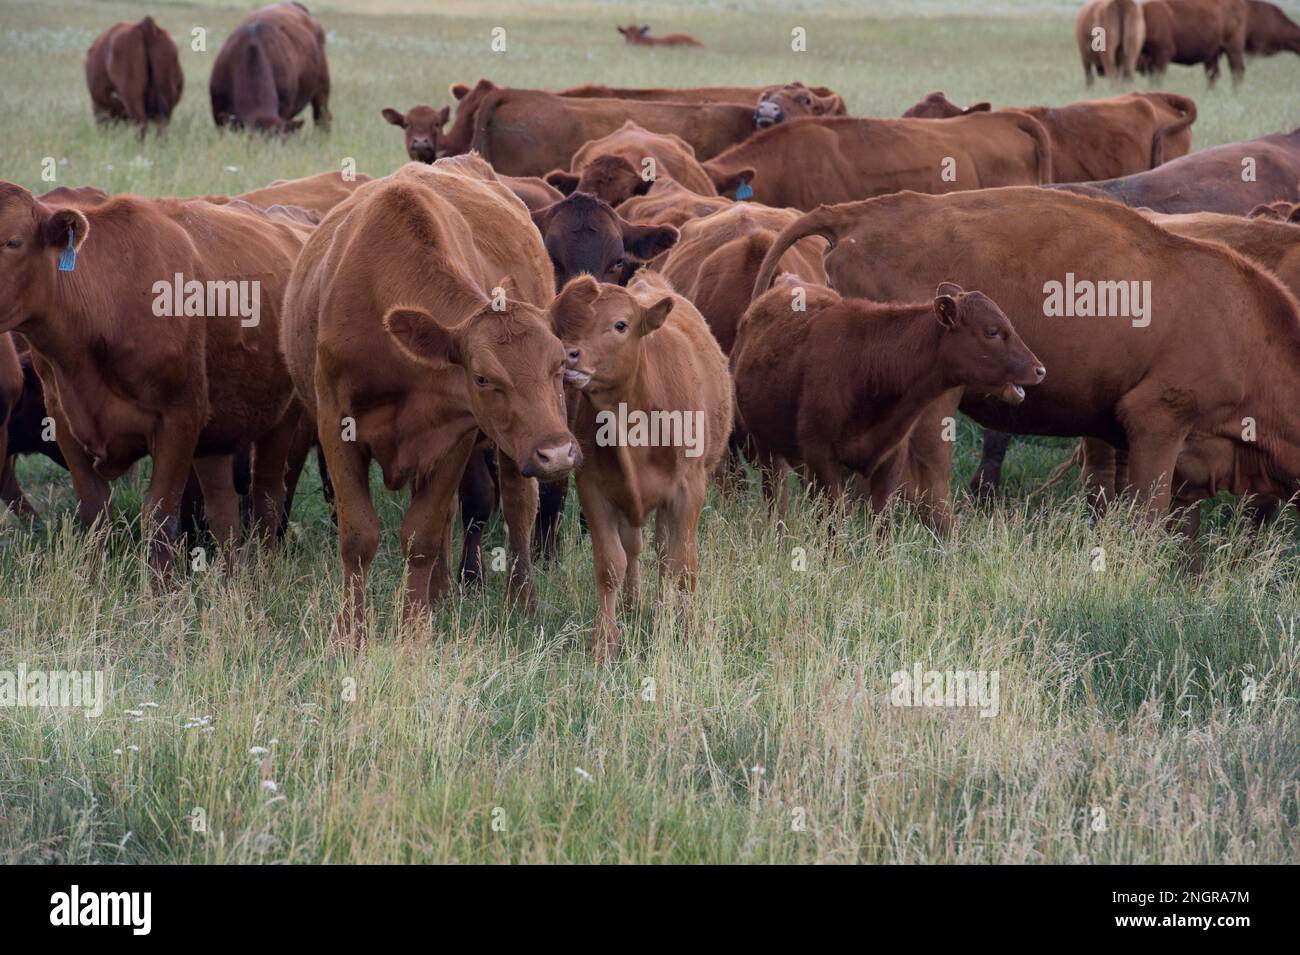 Red angus cattle in a meadow in the upper Lost River Basin, Idaho Stock Photo